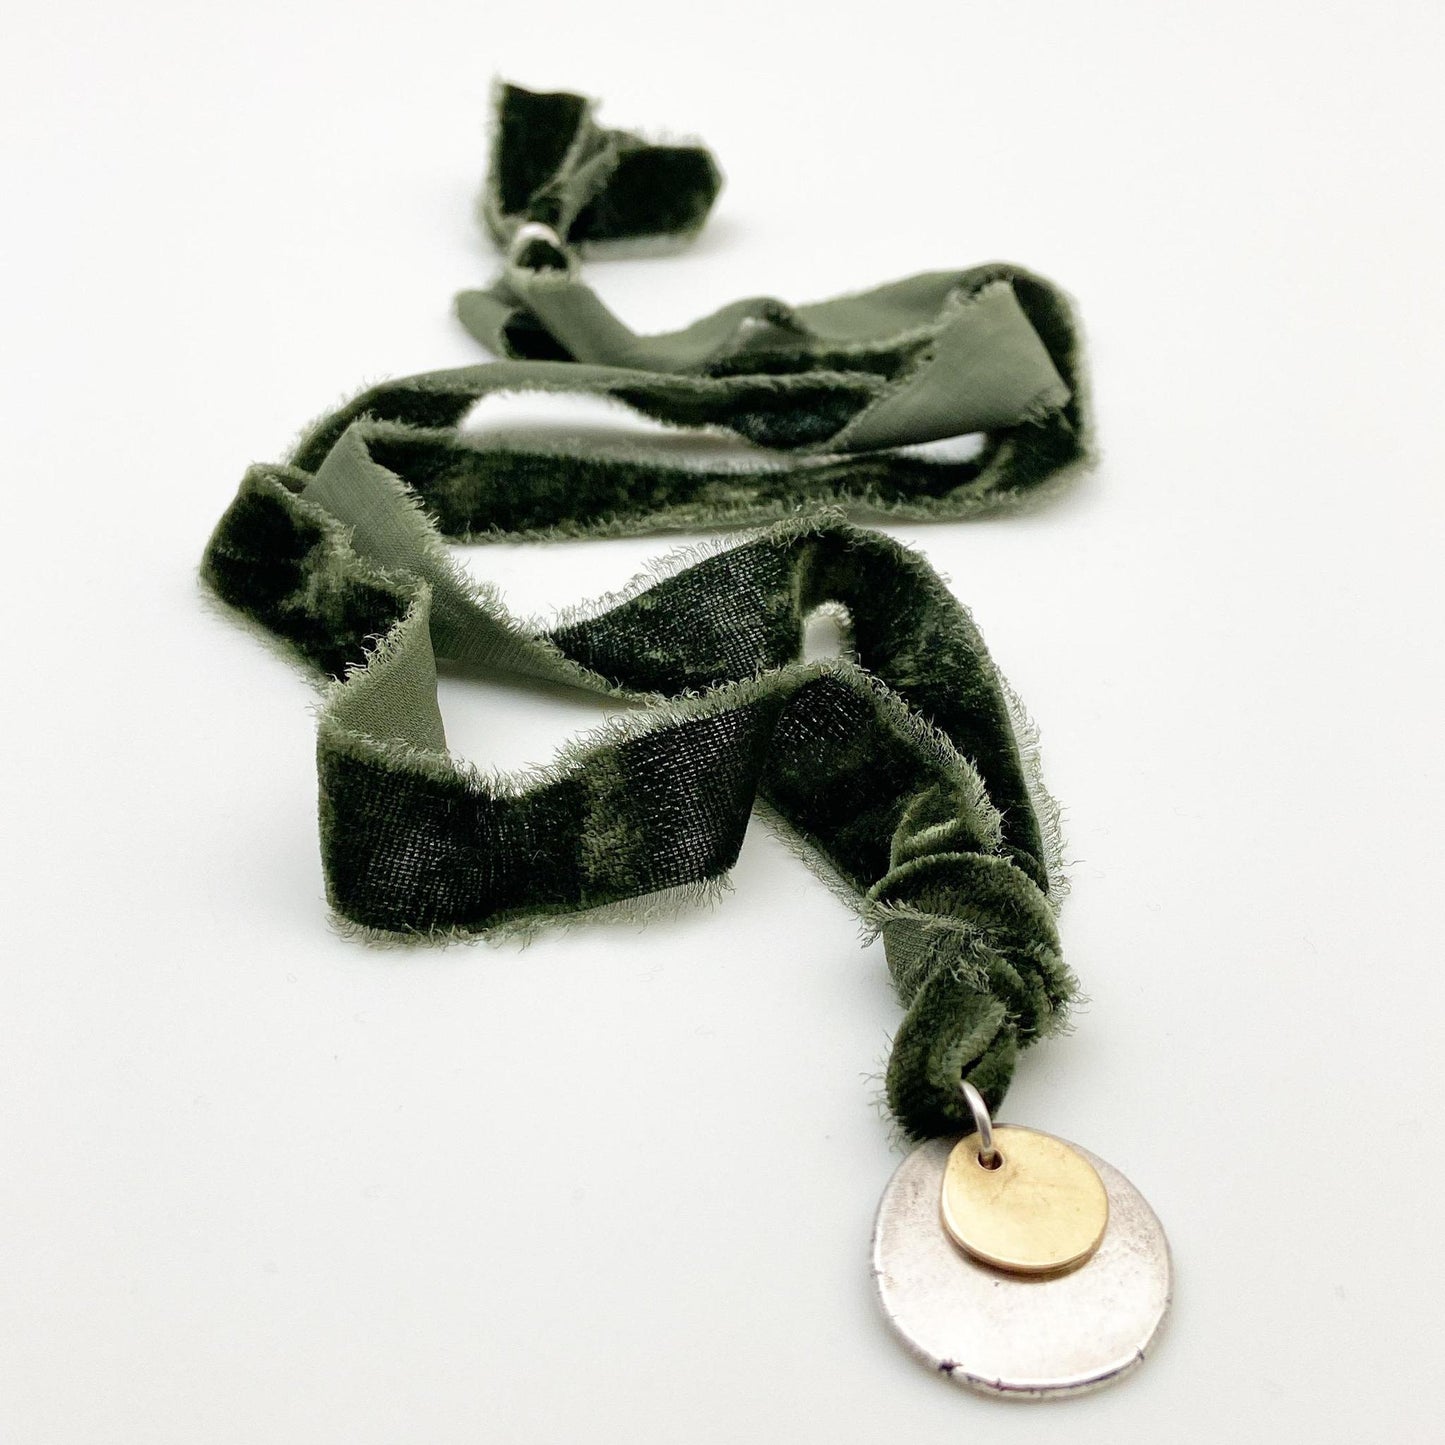 Necklace - Life Balance in Silver and Gold - Medallions on Green Silk Velvet